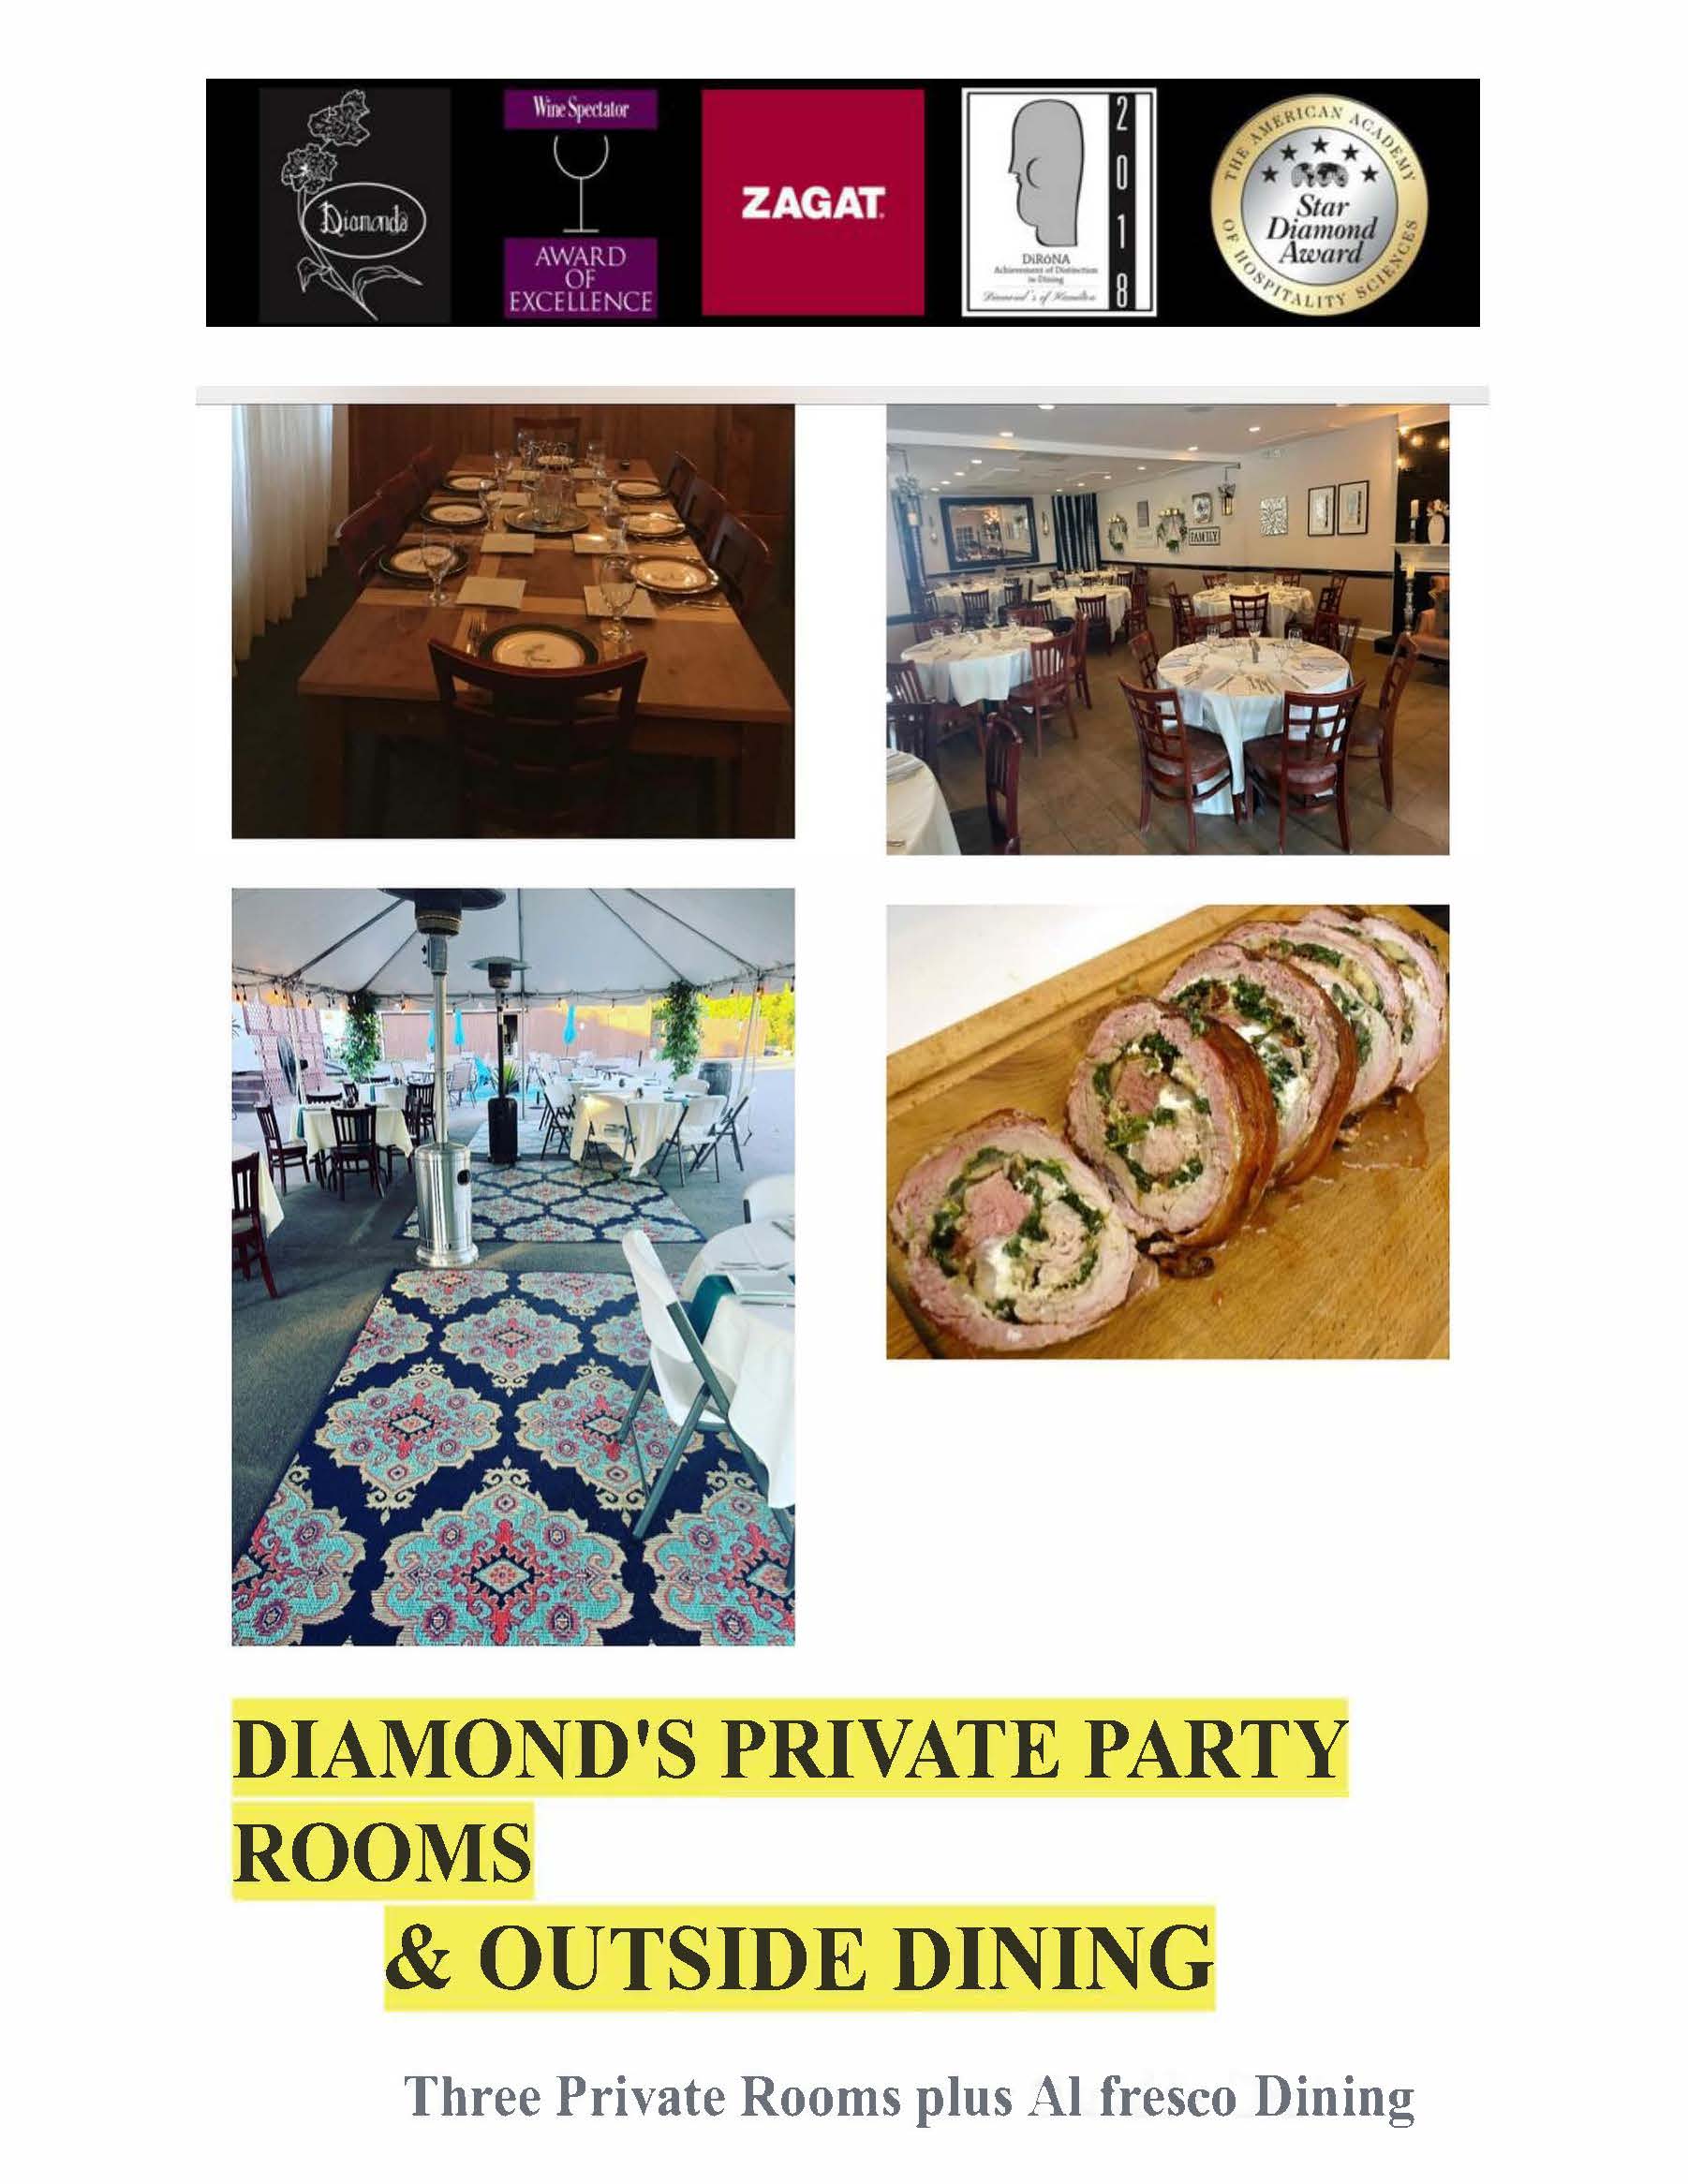 A flyer for diamond's private party rooms and outdoor dining.